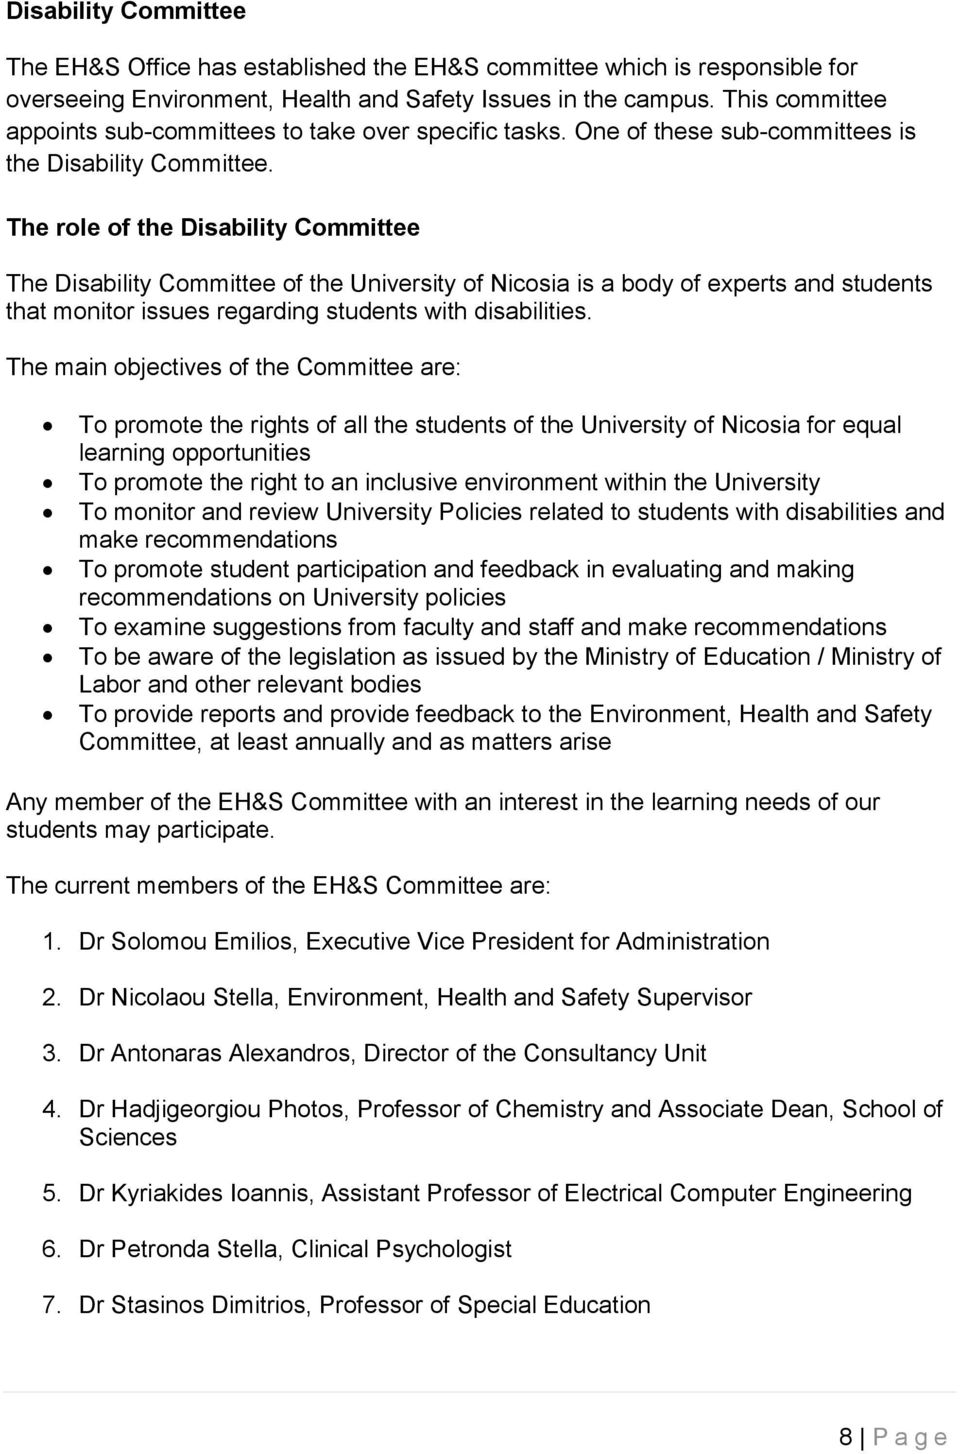 The role of the Disability Committee The Disability Committee of the University of Nicosia is a body of experts and students that monitor issues regarding students with disabilities.